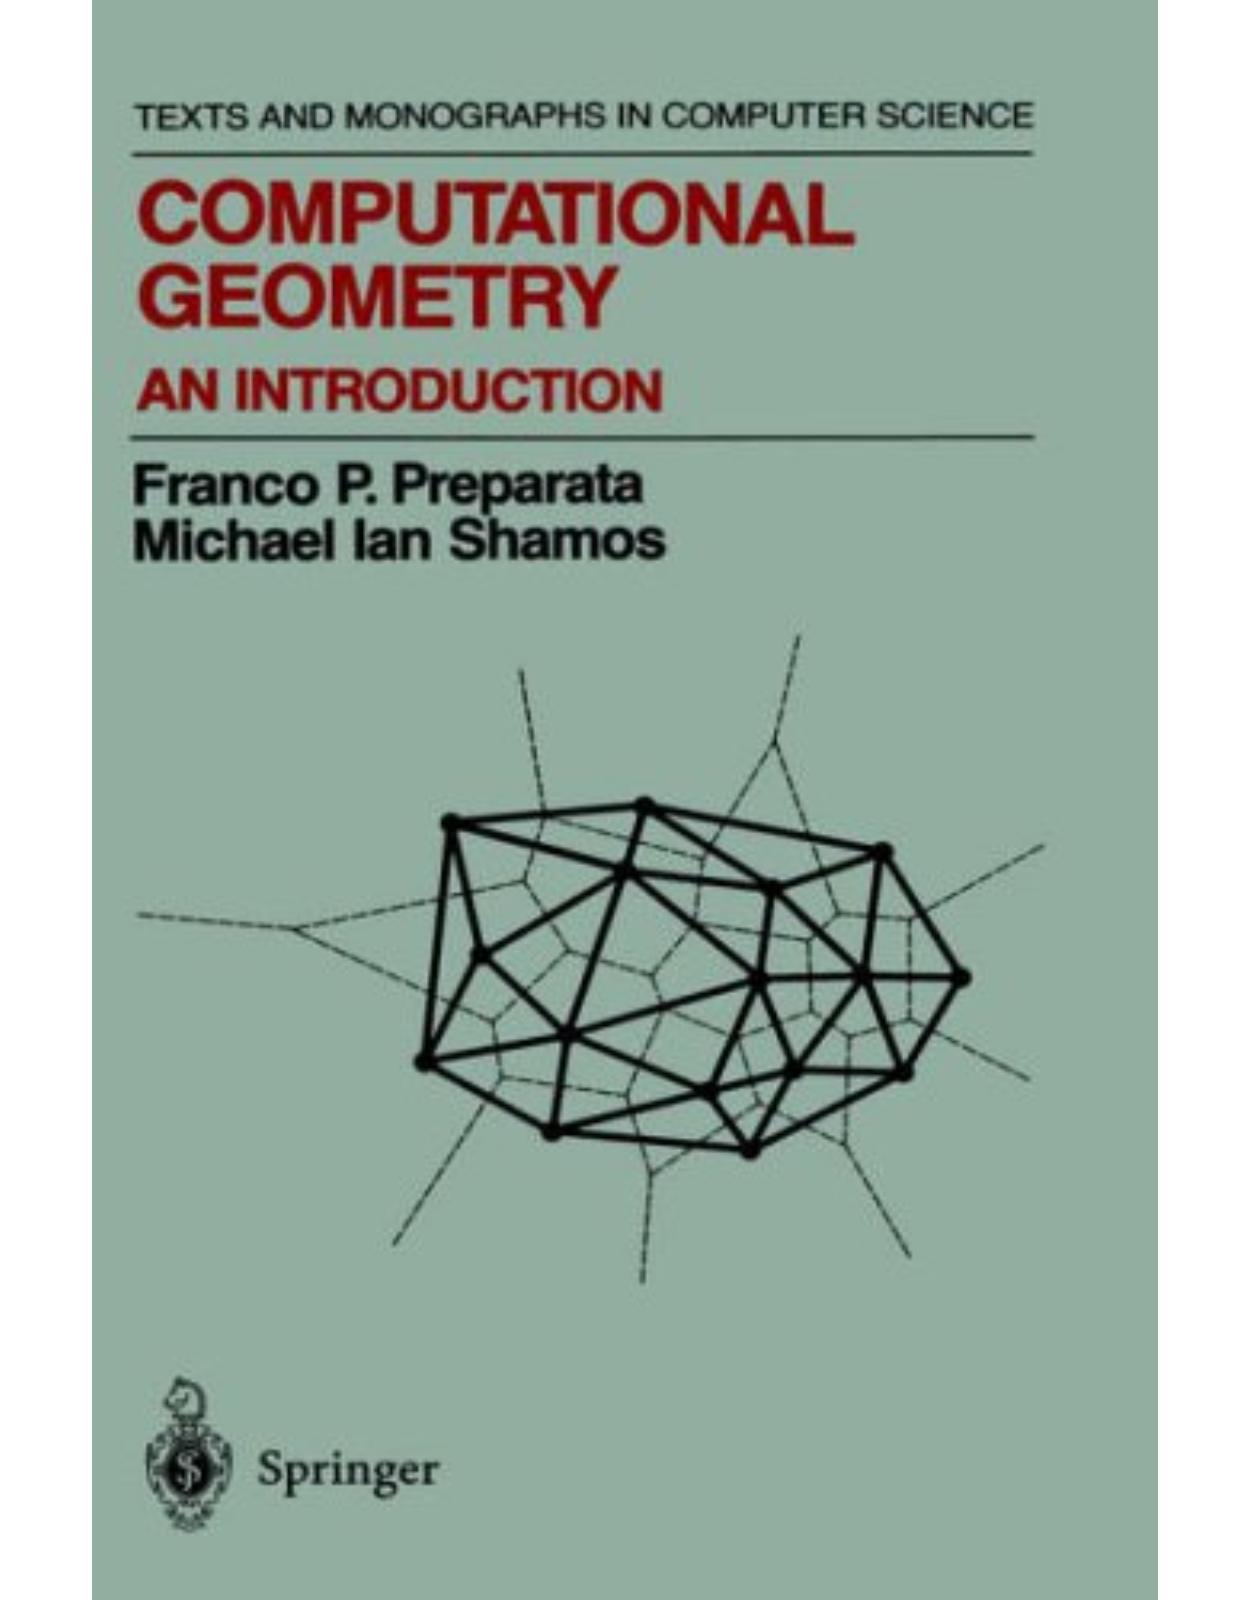 Computational Geometry: An Introduction (Monographs in Computer Science)